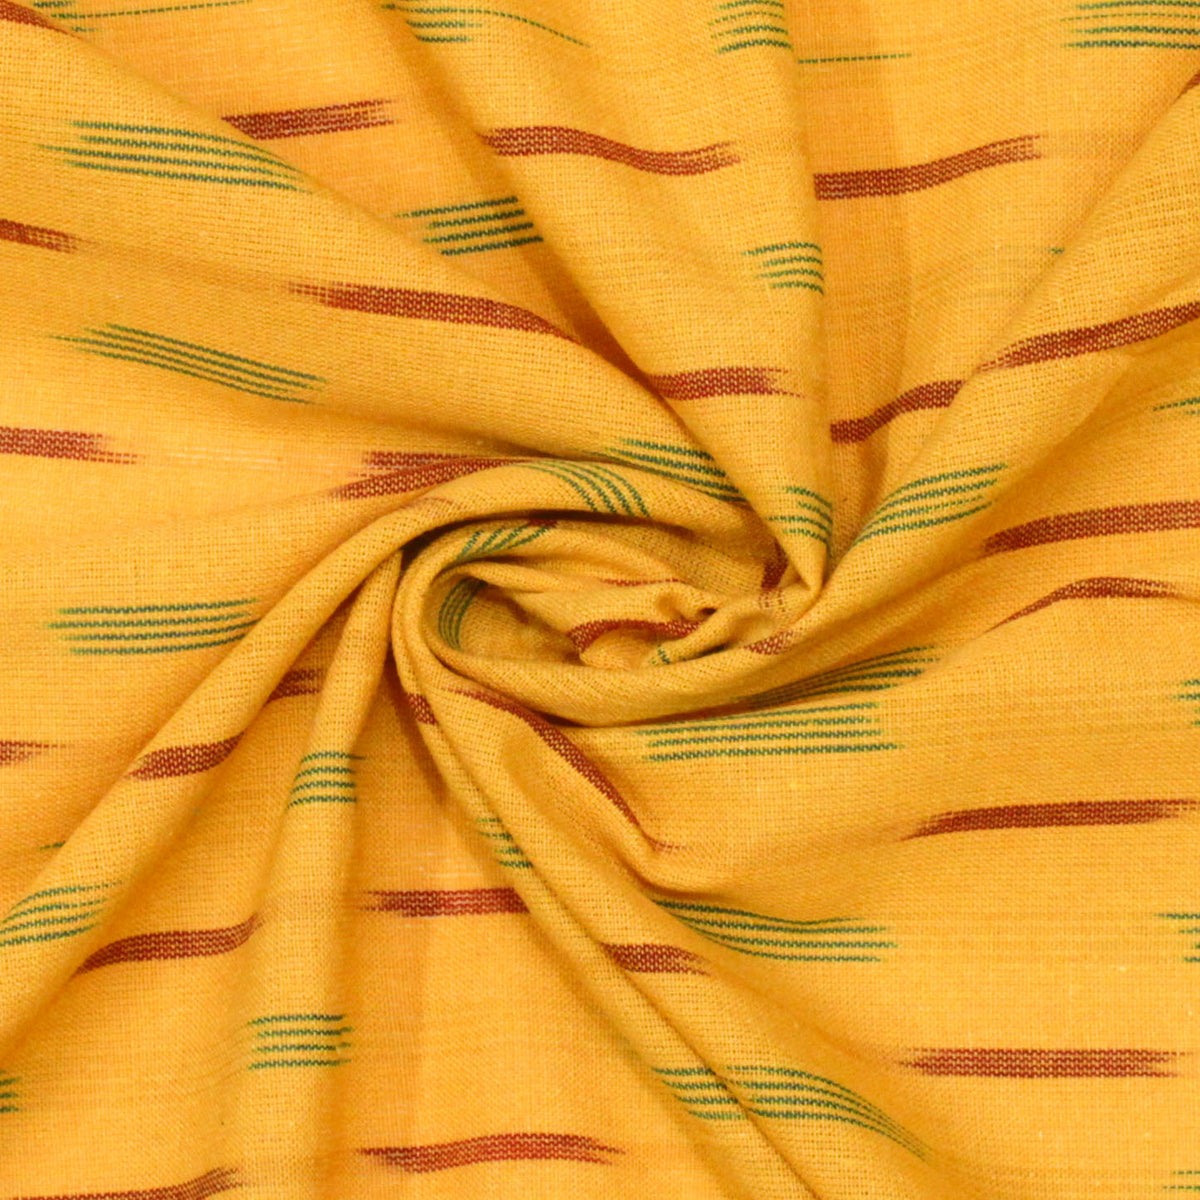 Ikat Hand Woven Cotton Fabric Design - Mustard Yellow With Red & Green Fine lines